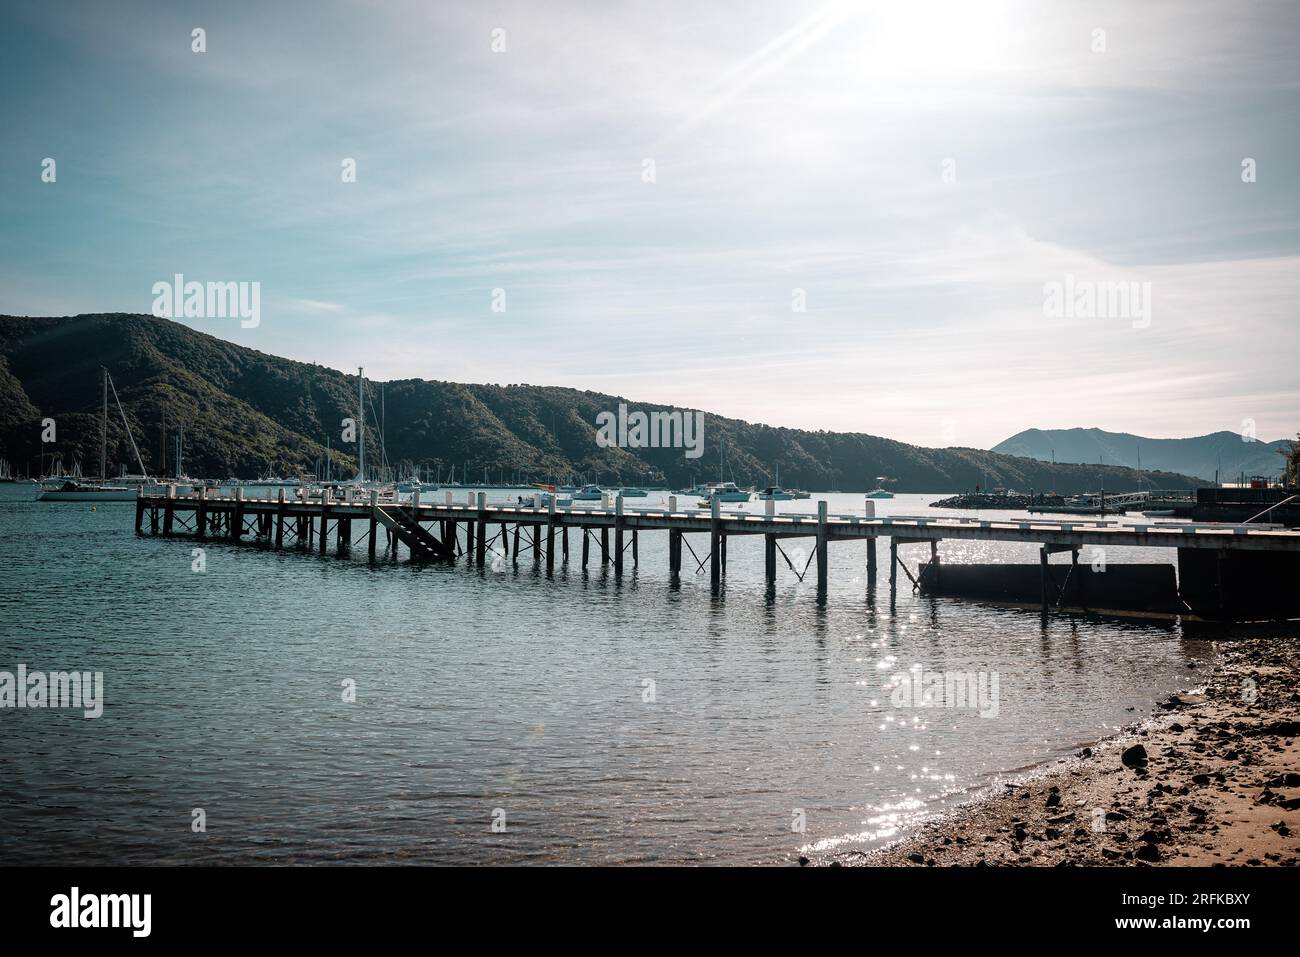 An image of a pier in the ocean. The sky is Blue and clear. In the back ground is boats and hills. Stock Photo